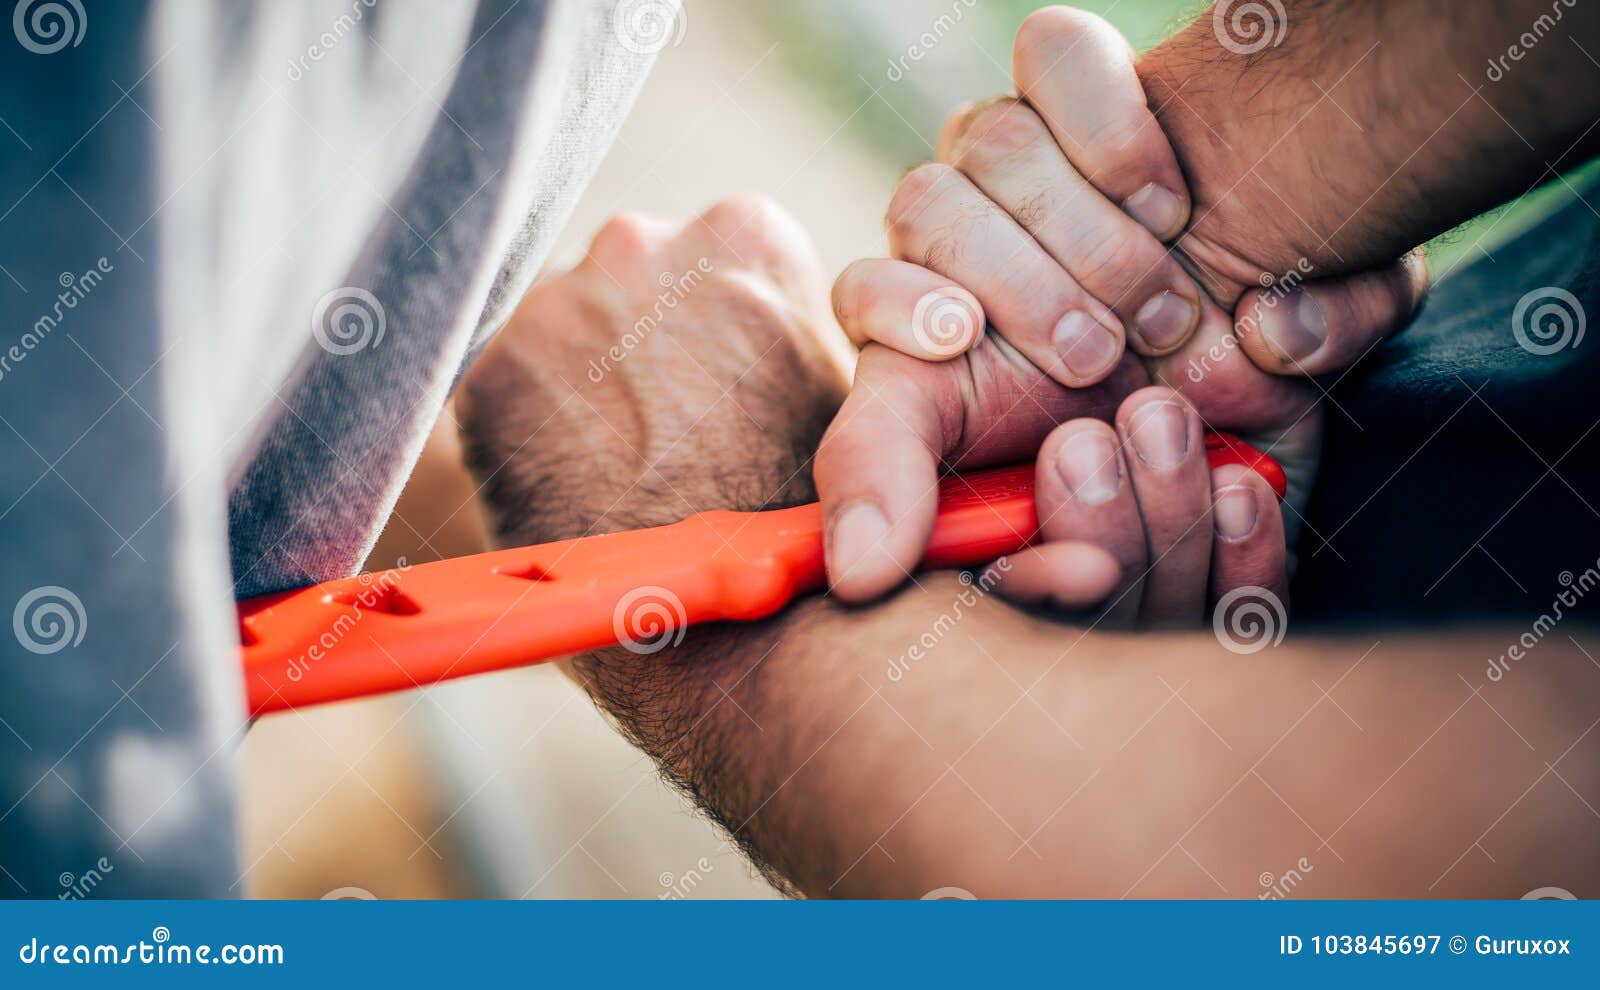 Self Defense Disarming Technique Against Threat And Knife Attack Stock Image Image Of Kapap Disarming